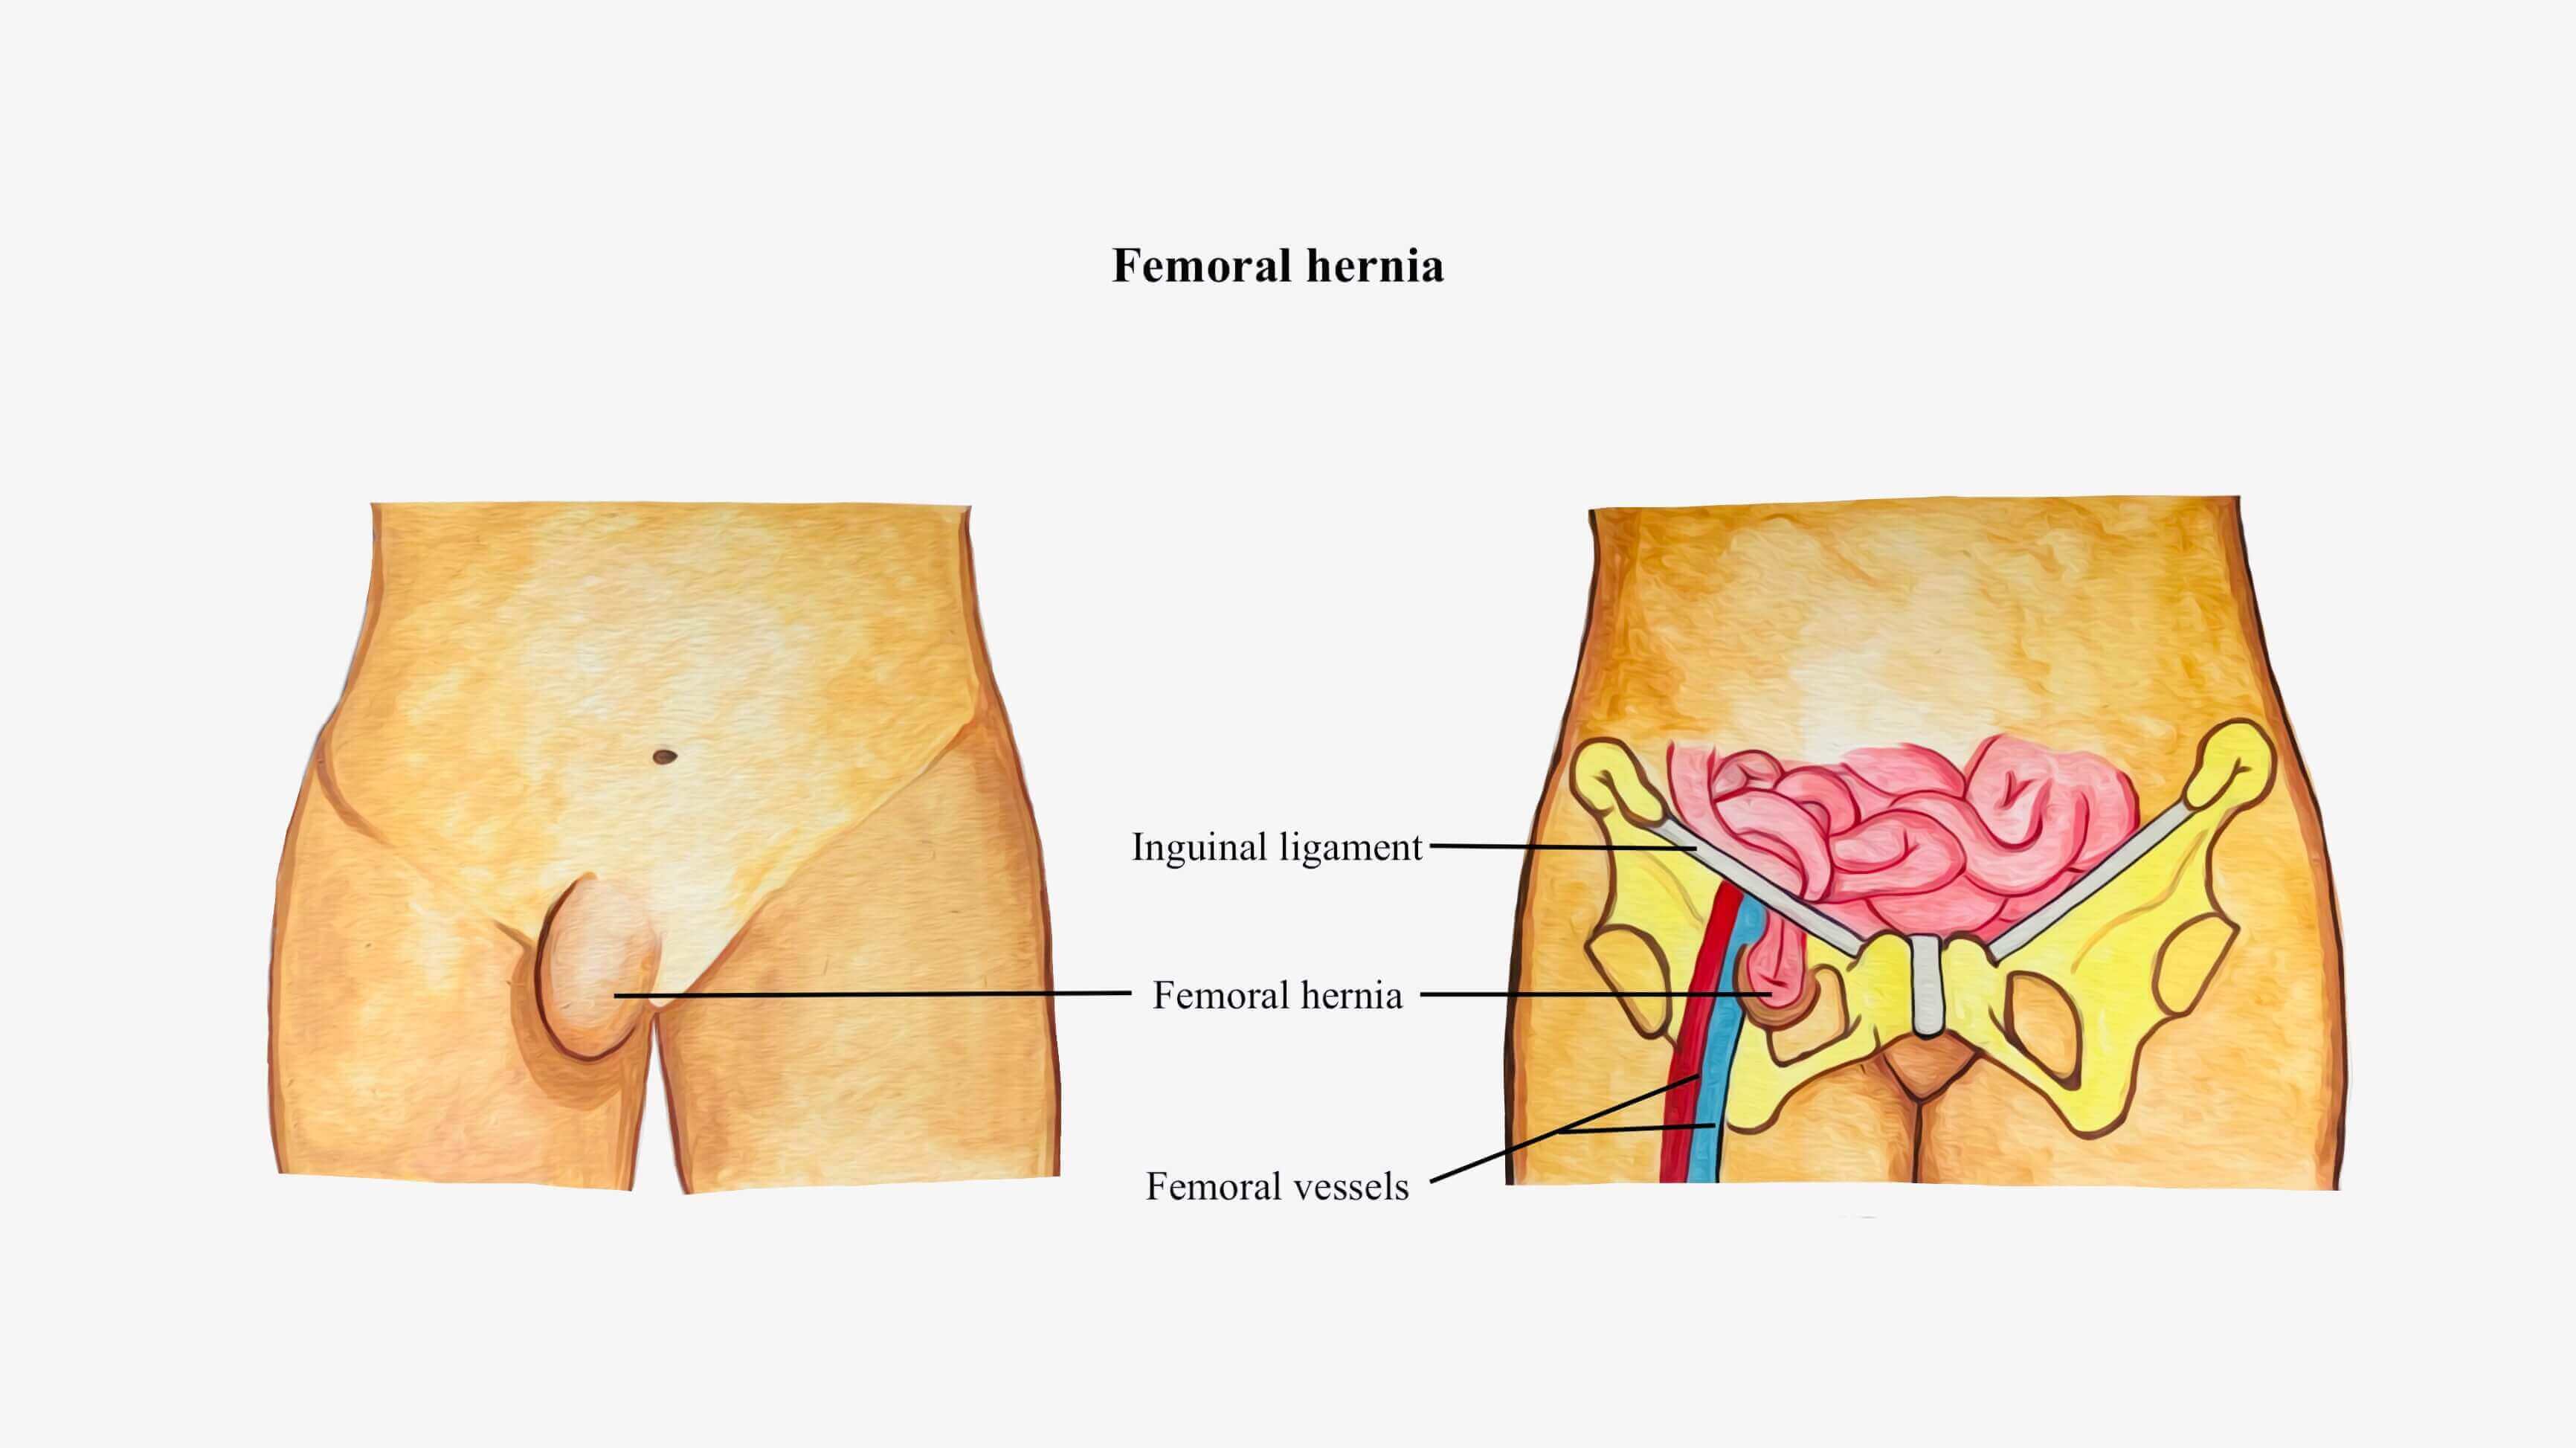 Do inguinal and femoral hernias require two separate surgeries